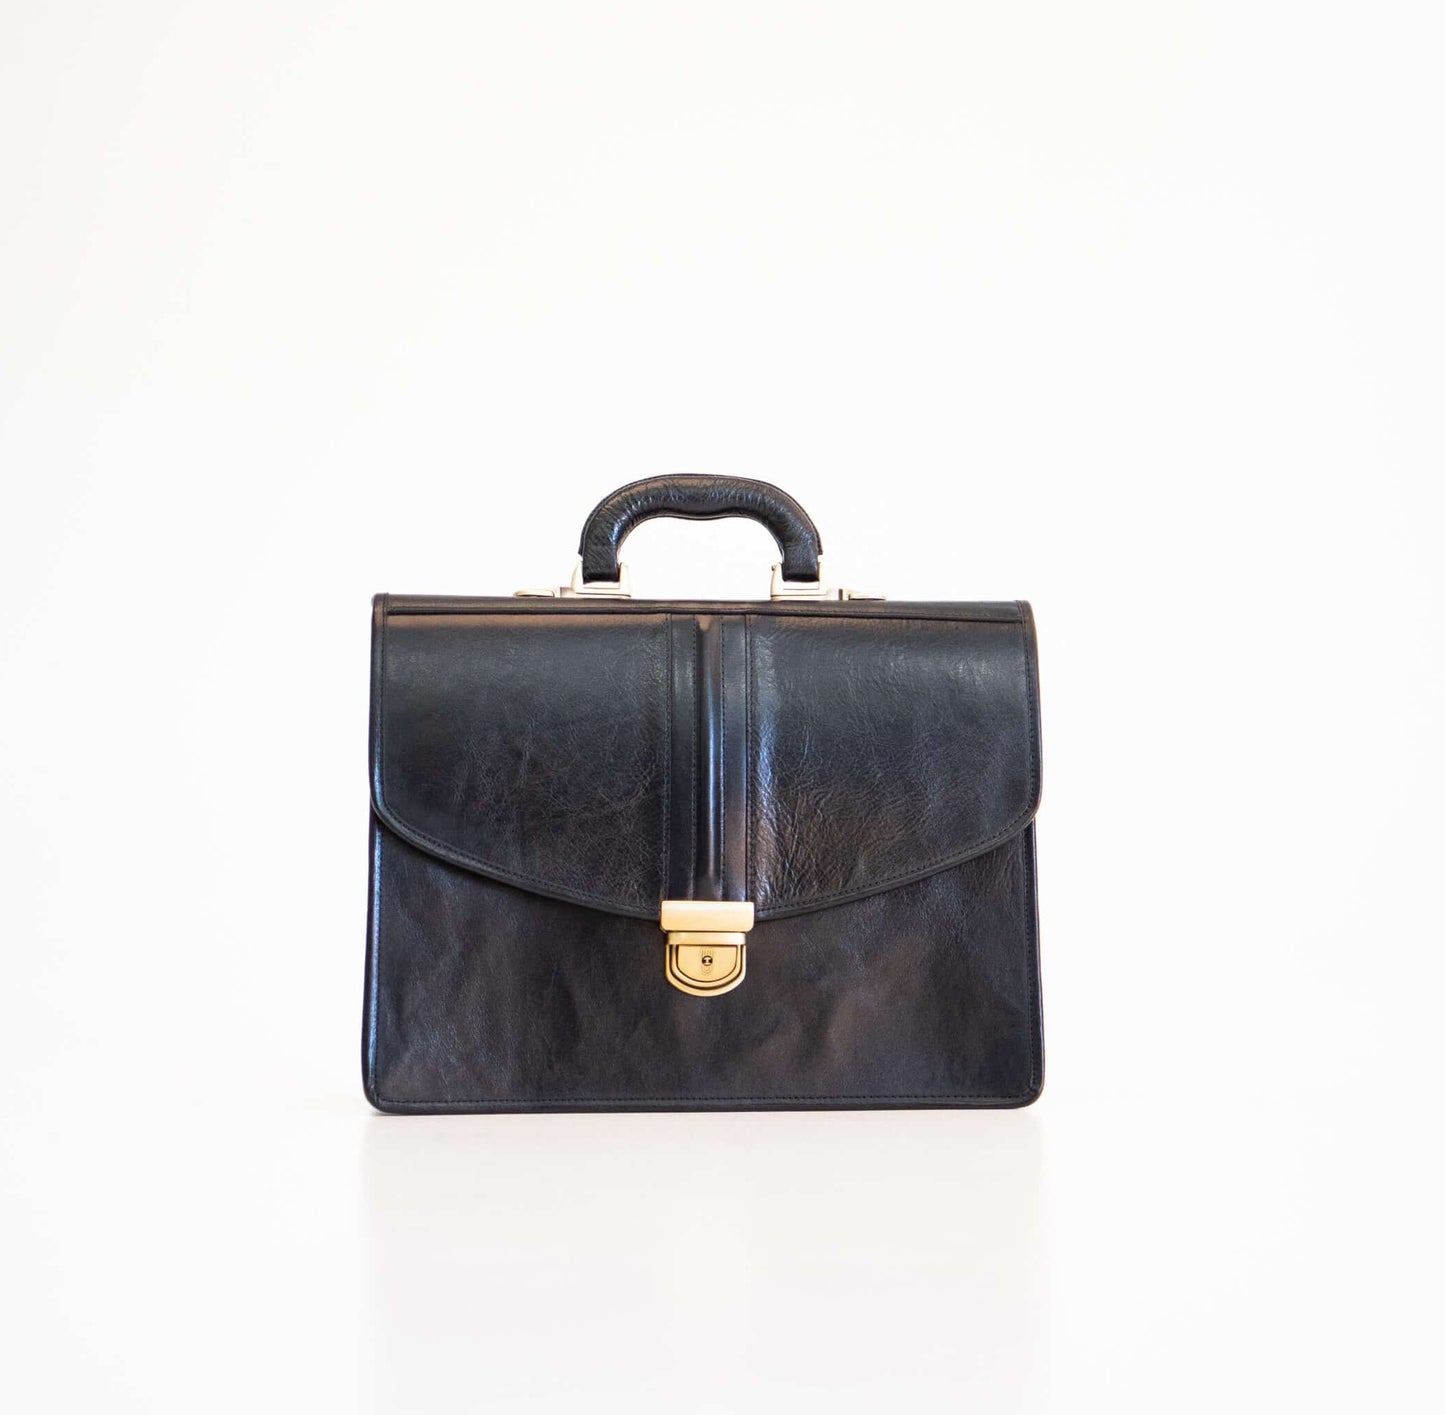 Genuine Leather Briefcase with 3 compartments, multiple pockets, and zippered storage. Removable shoulder strap for versatile carrying options. Elevate your professional style with this sleek black design. Perfect for daily commute or work-from-home setup.